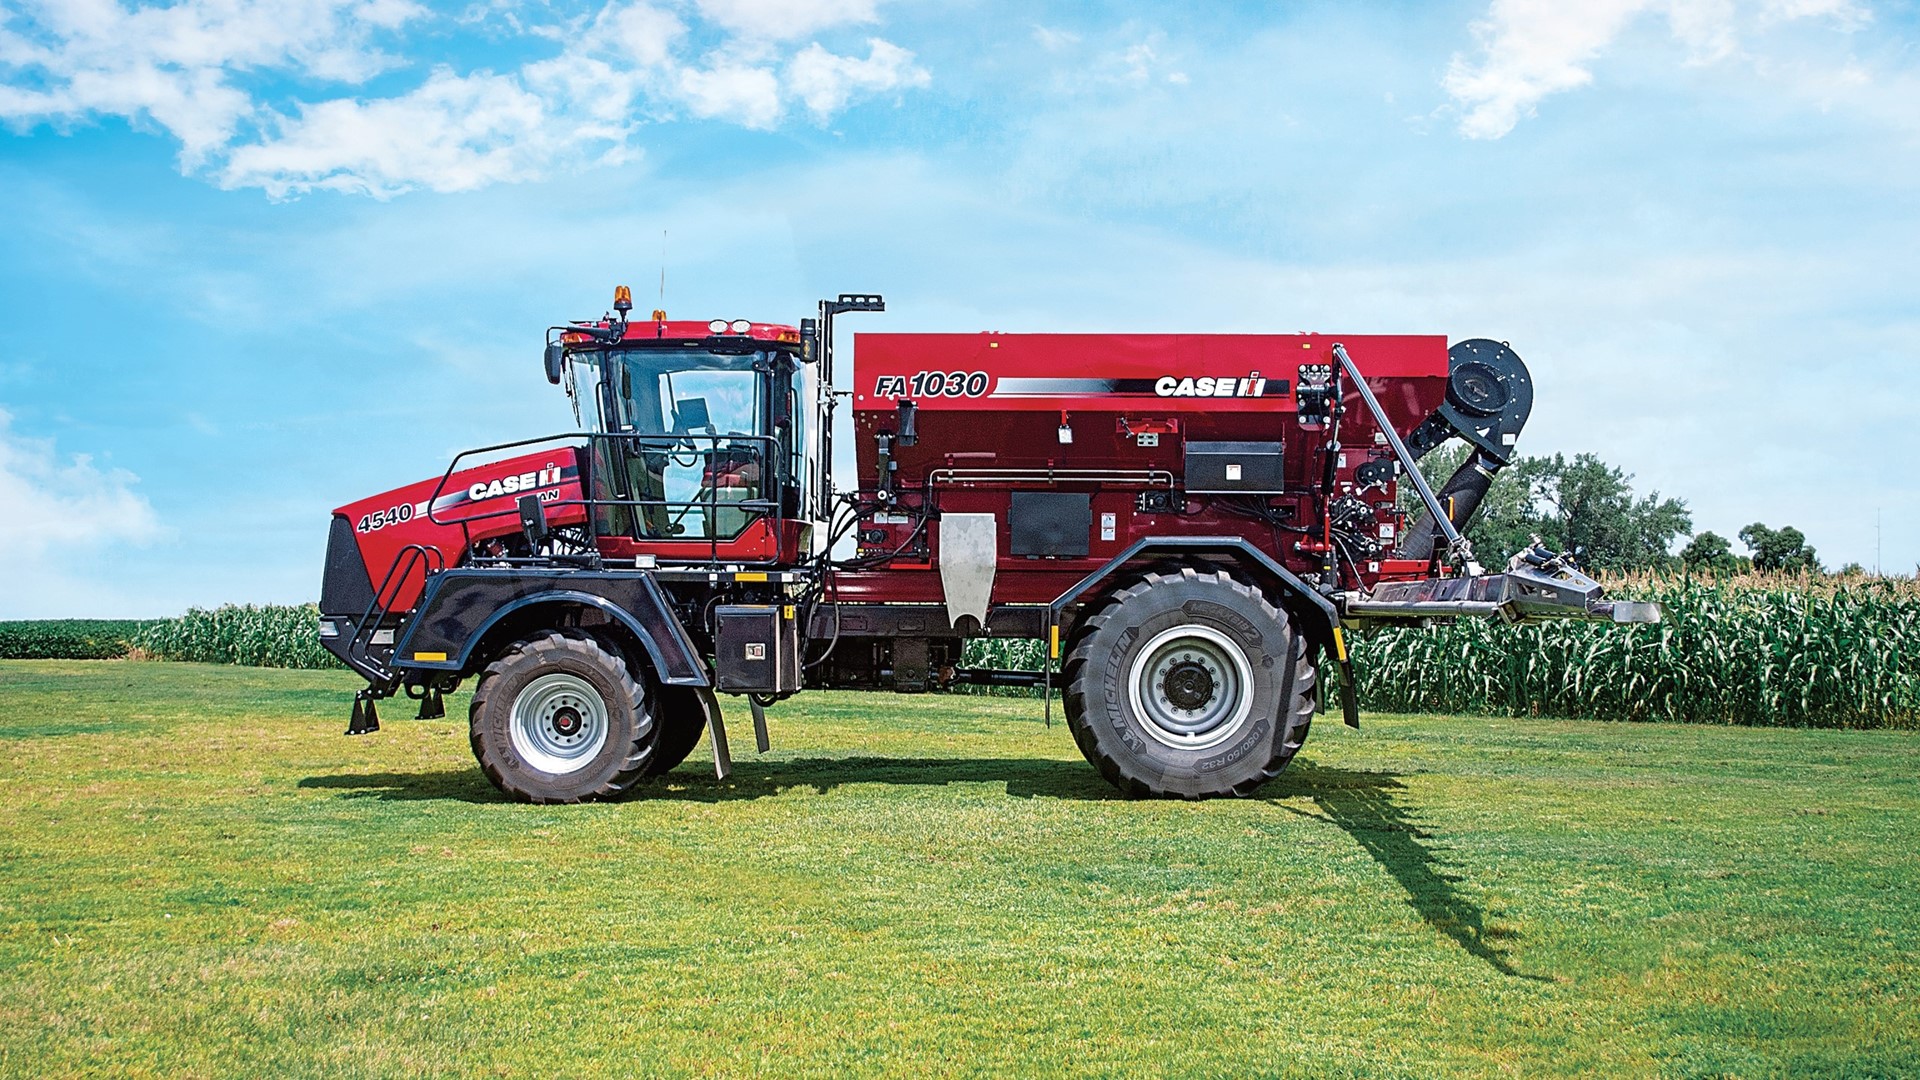 The new Case IH FA 1030 air boom applicator helps pack more productive days into every season.